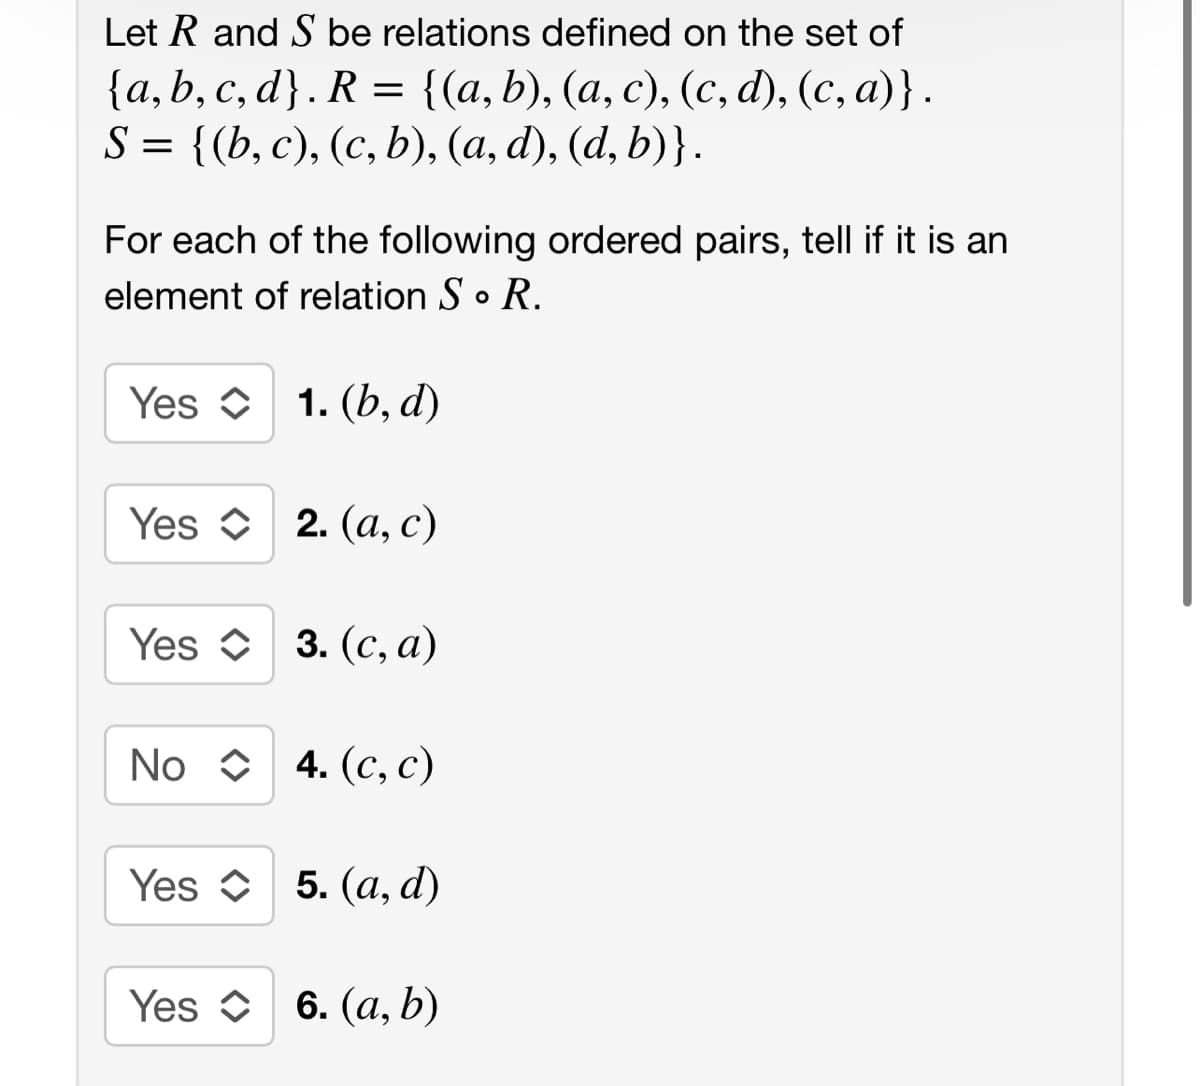 Let R and S be relations defined on the set of
{a,b,c,d}. R = {(a, b), (a, c), (c,d), (c, a)} .
S = {(b, c), (c, b), (a, d), (d, b)}.
For each of the following ordered pairs, tell if it is an
element of relation S. R.
Yes 1. (b, d)
C
Yes 2. (a, c)
C
Yes 3. (c, a)
No 4. (c, c)
Yes 5. (a, d)
Yes 6. (a, b)
C